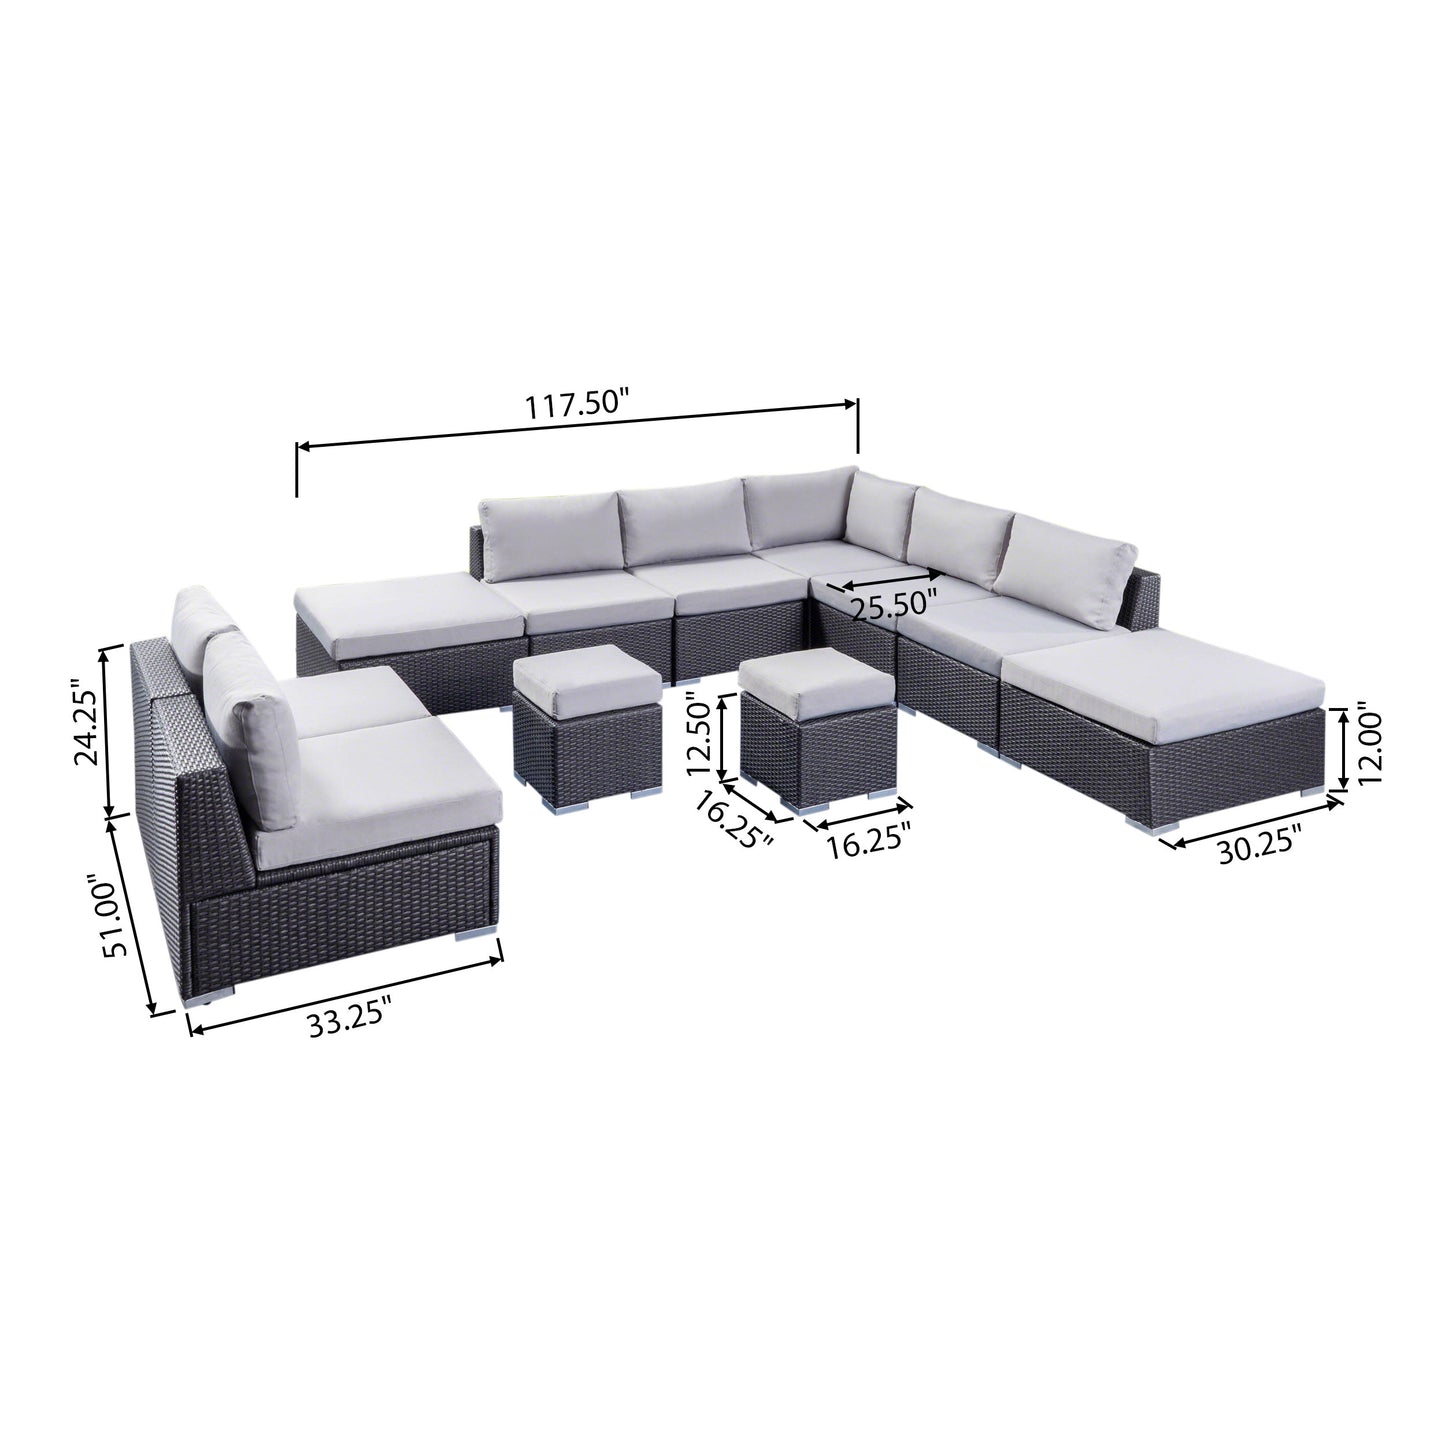 Tammy Rosa Outdoor 7 Seat Wicker Sofa Sectional Set with Aluminum Frame